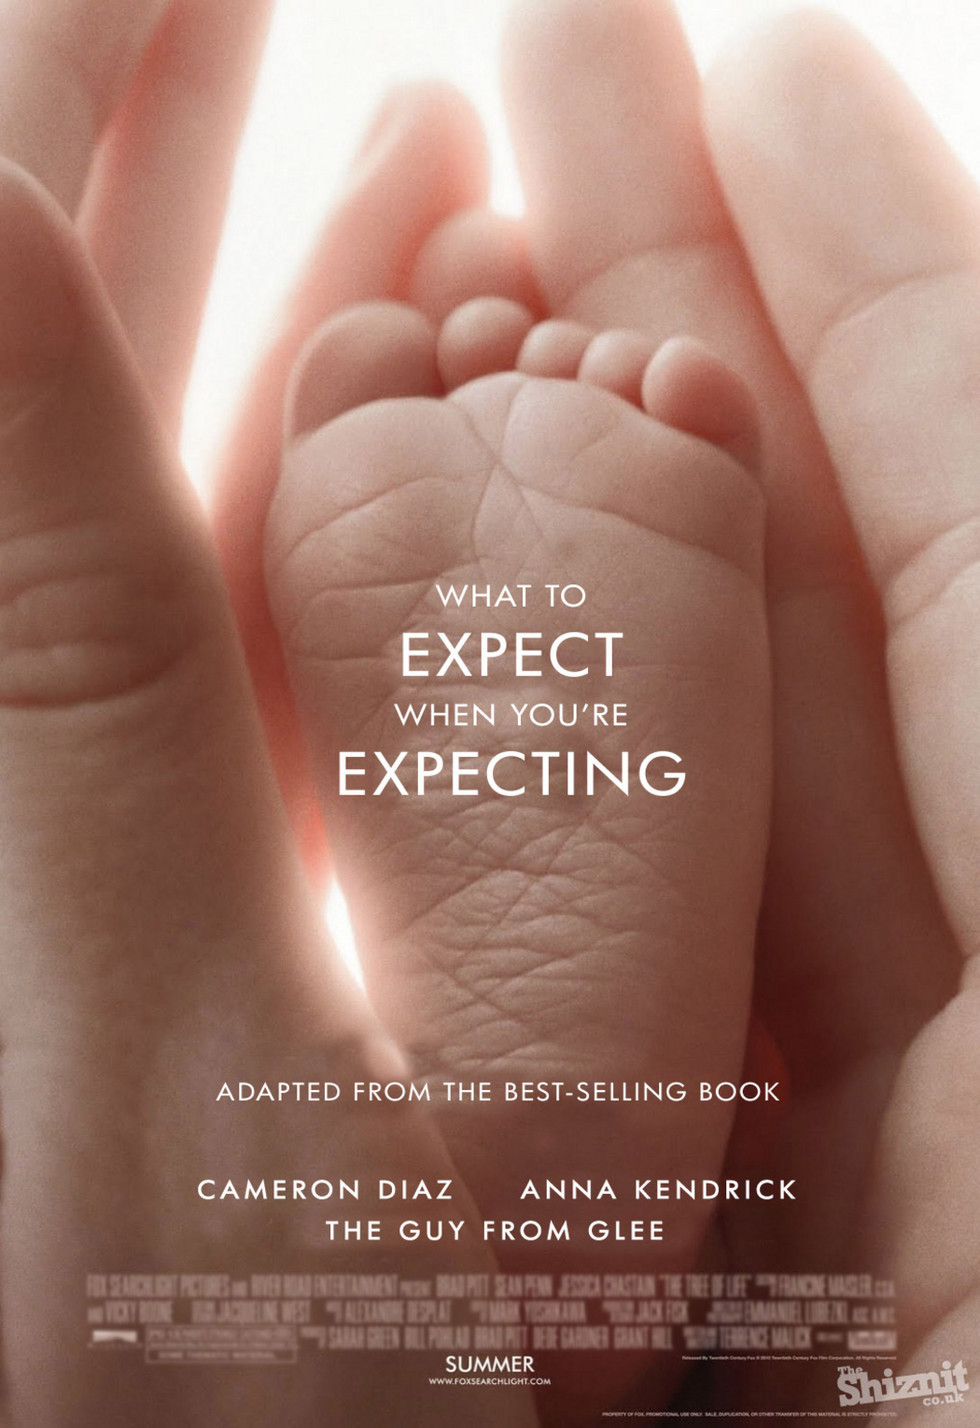 What to Expect When You're Expecting - Movie Poster #6 (Large)